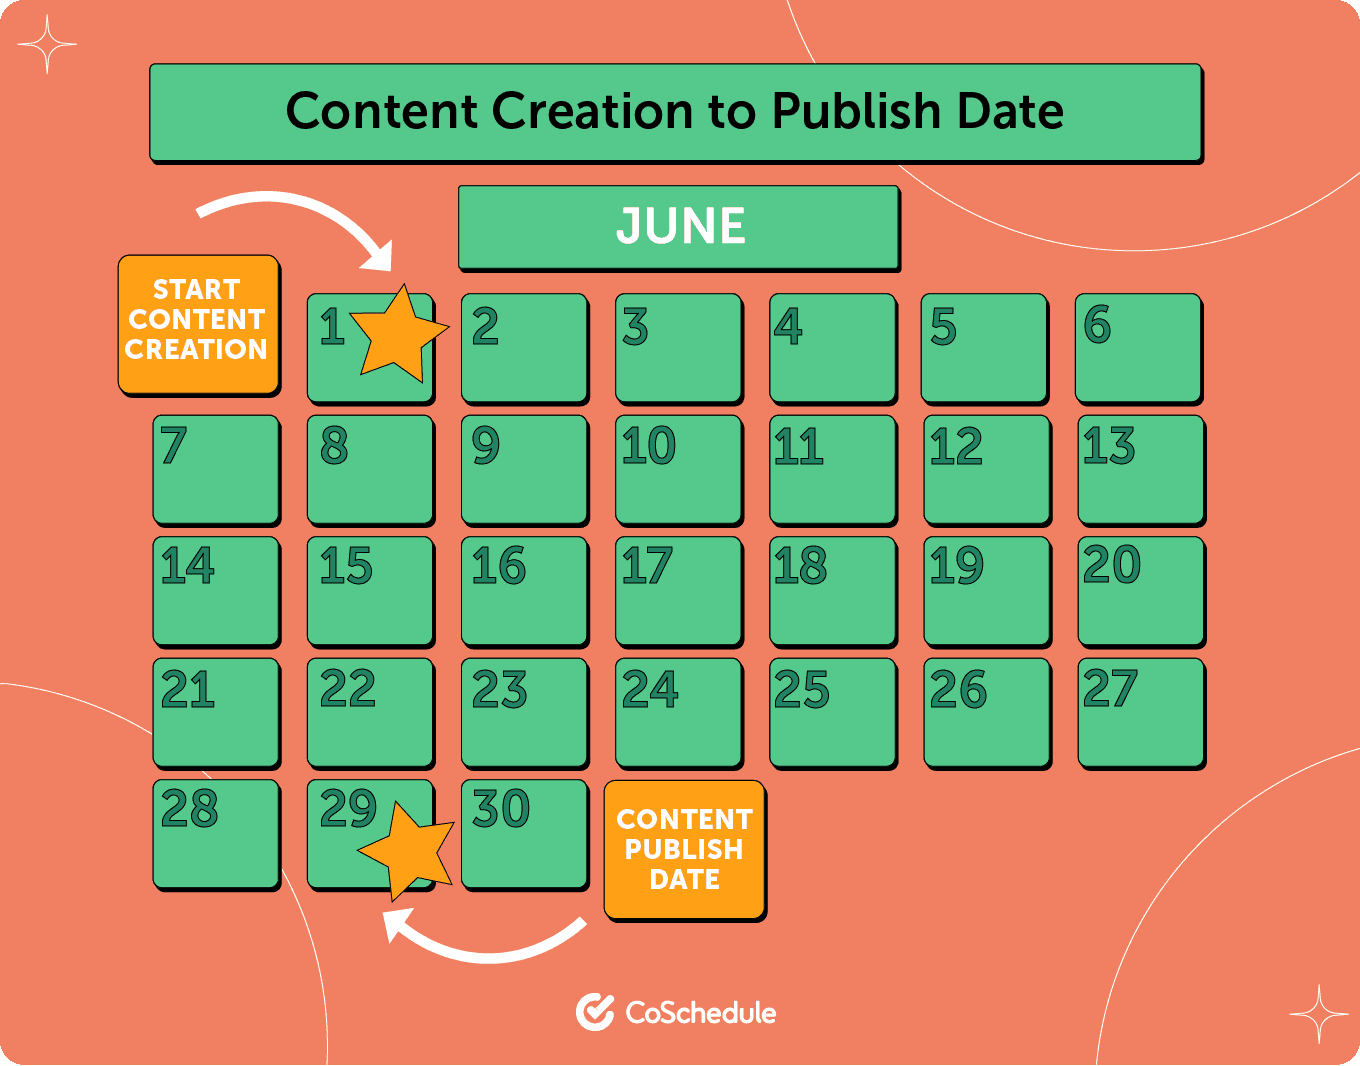 Content creation to publish date.